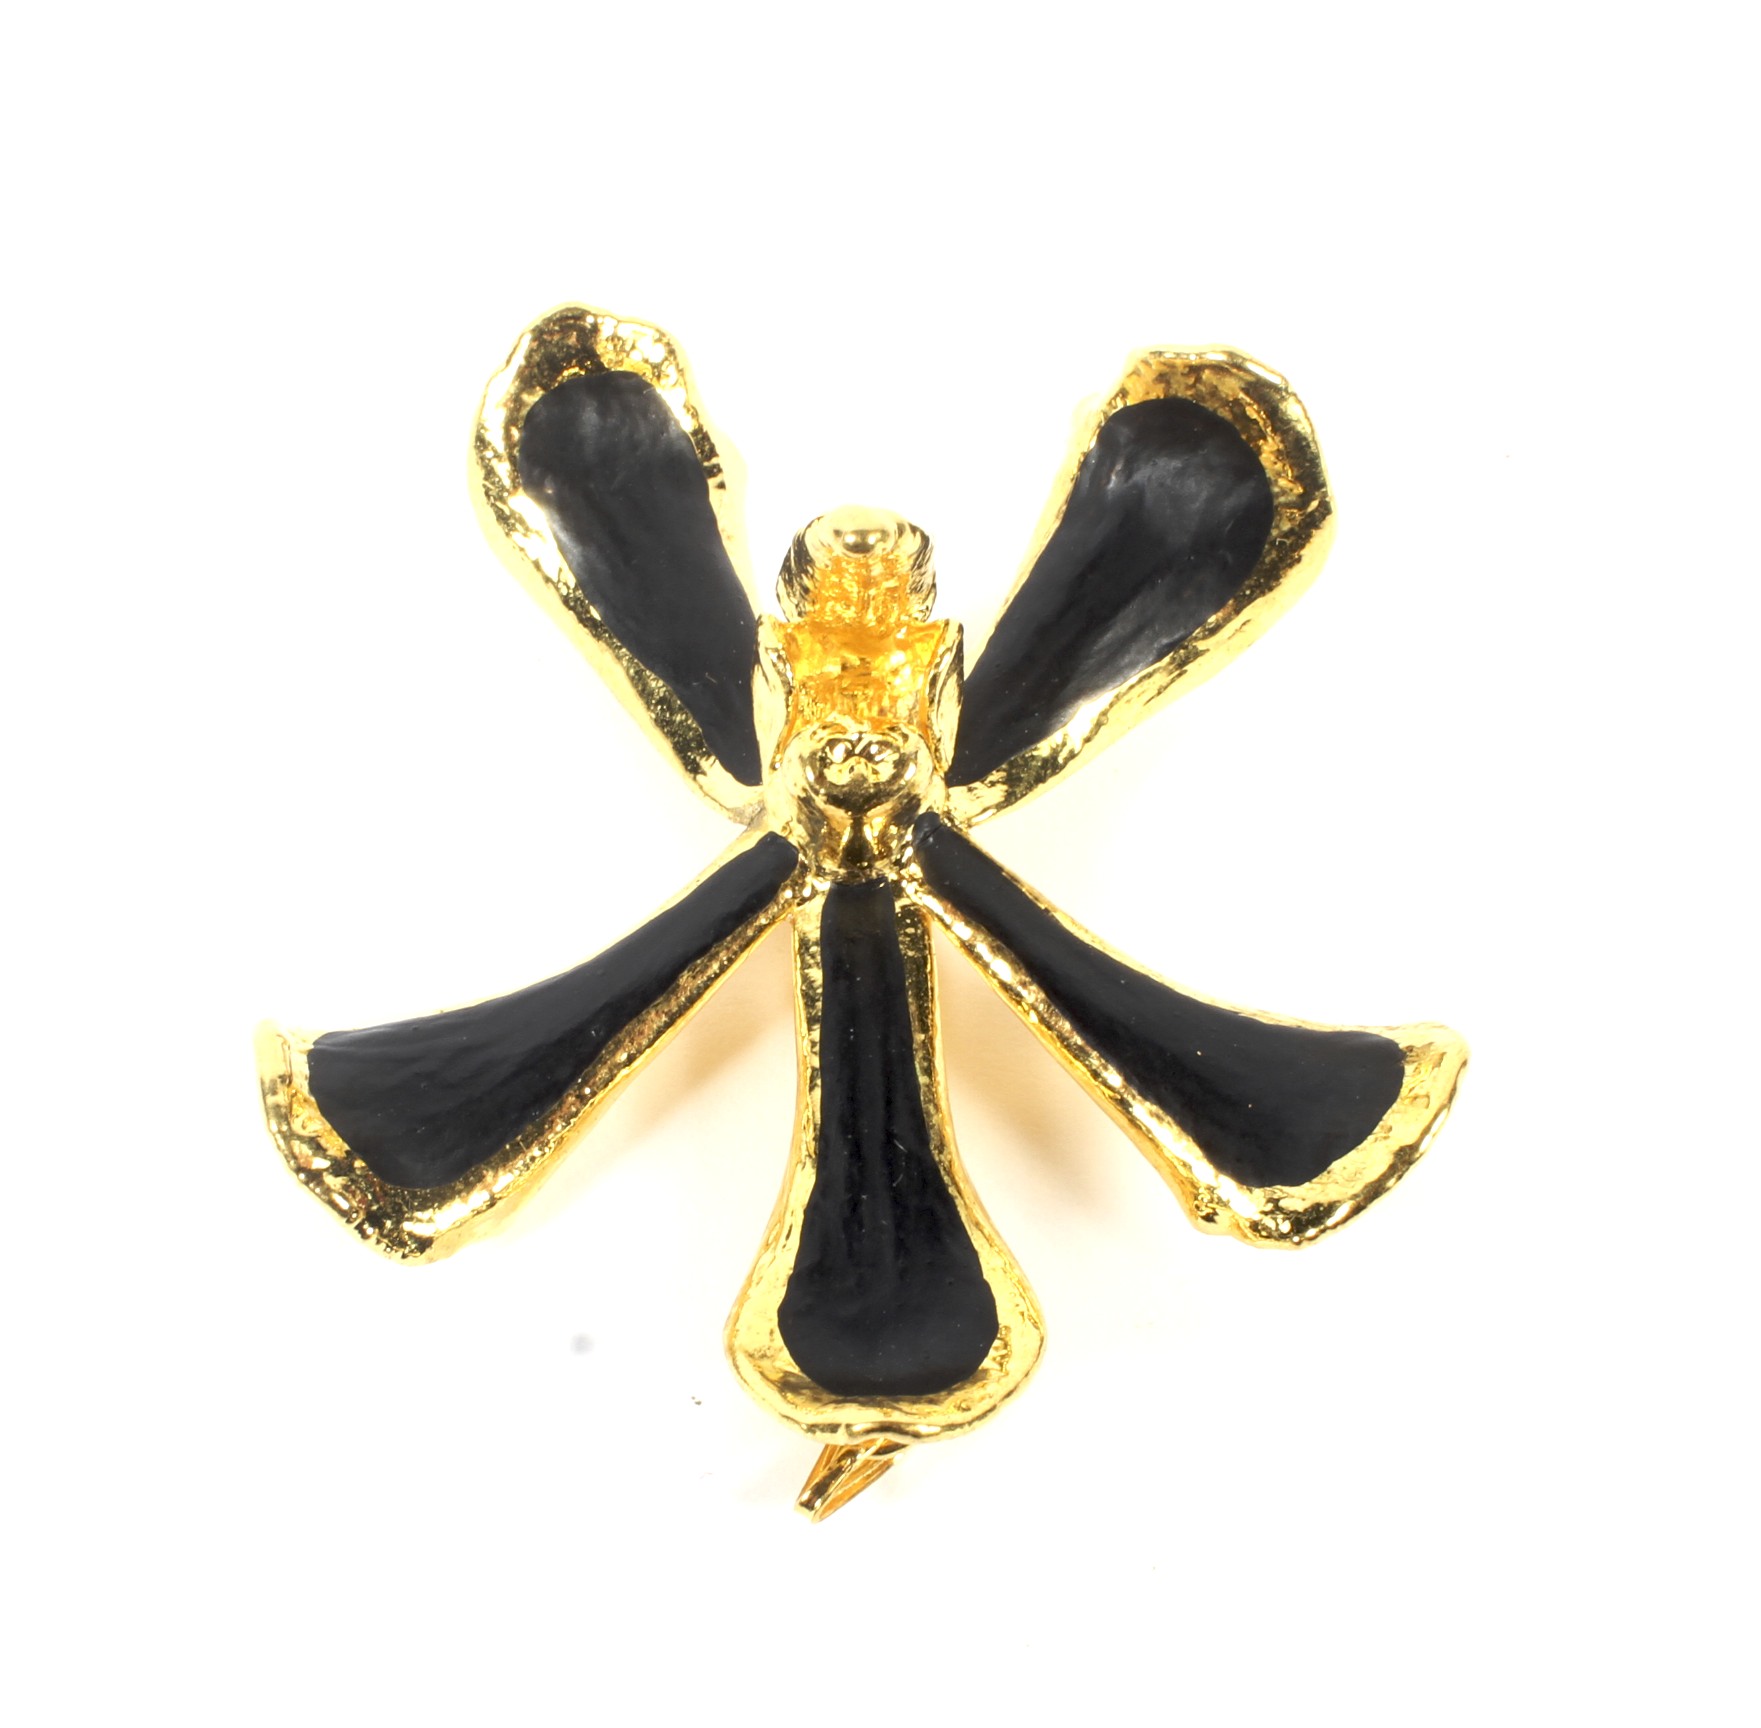 A Far Eastern gold-plated 'Black Orchid' brooch/pendant. Marked 'Risis 3C', approx.